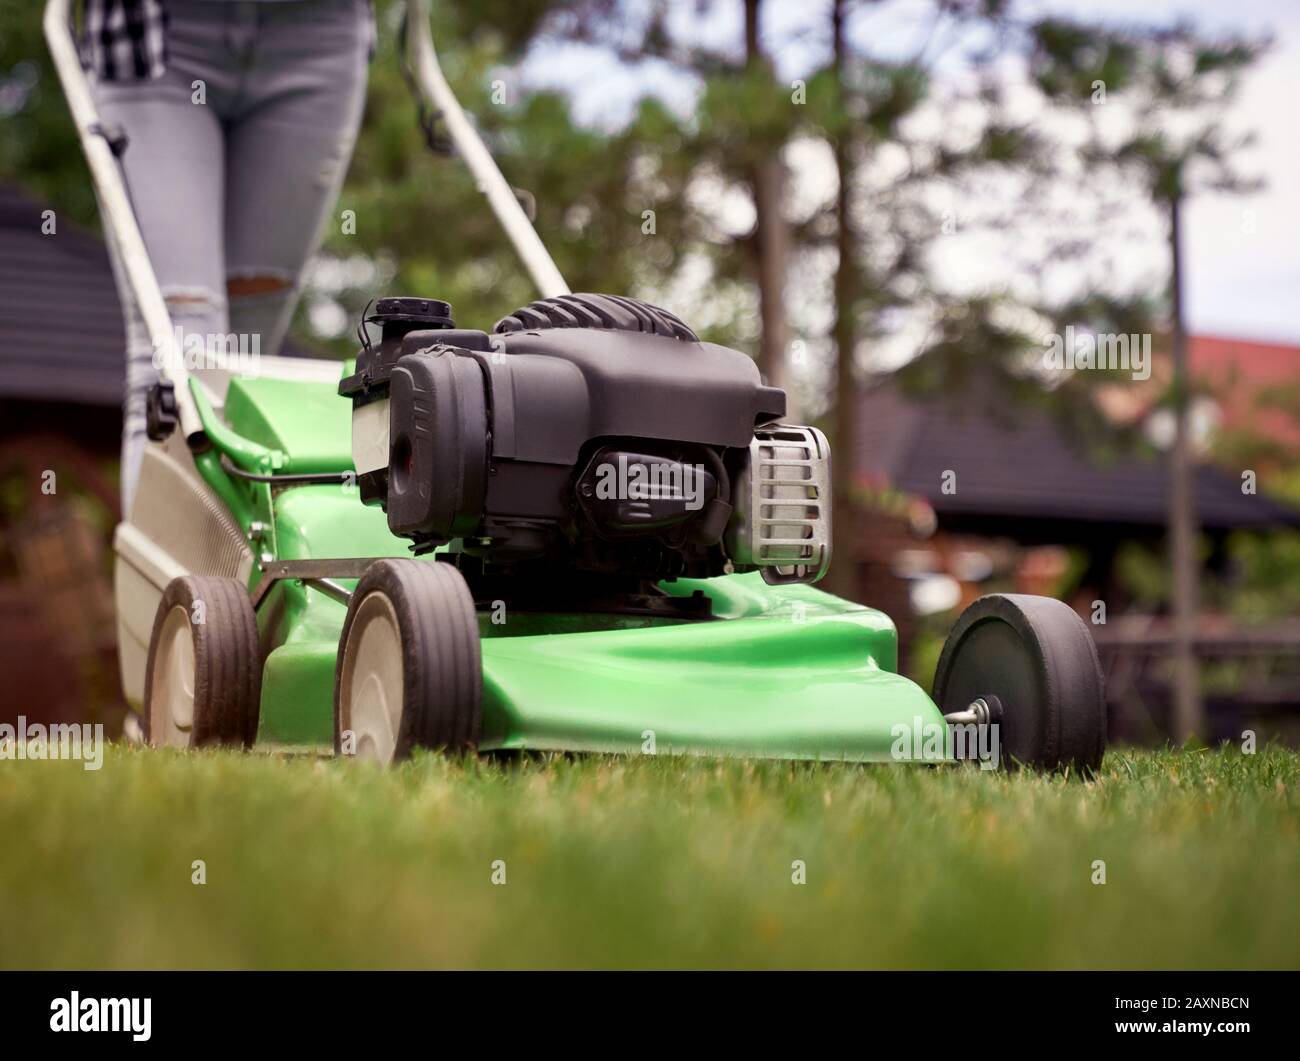 Close up of female legs in jeans of woman using lawn mower on backyard. Selective focus of incognito gardener working in summer, cutting grass in backyard. Concept of gardening, work, nature. Stock Photo